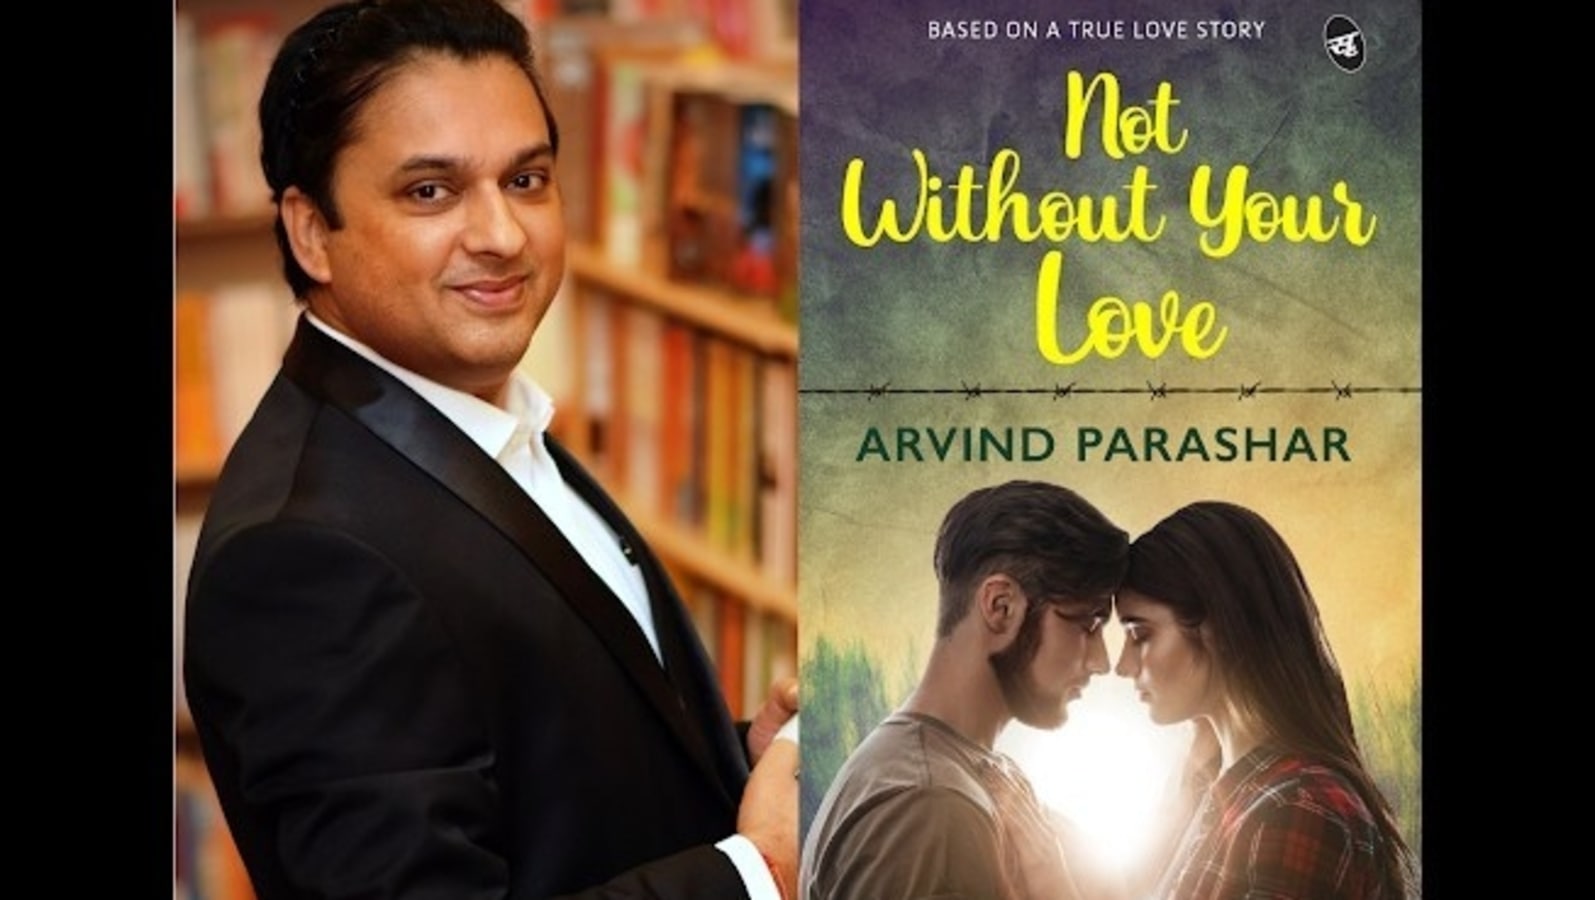 Interview with Arvind Parashar, author of “Not without your love”